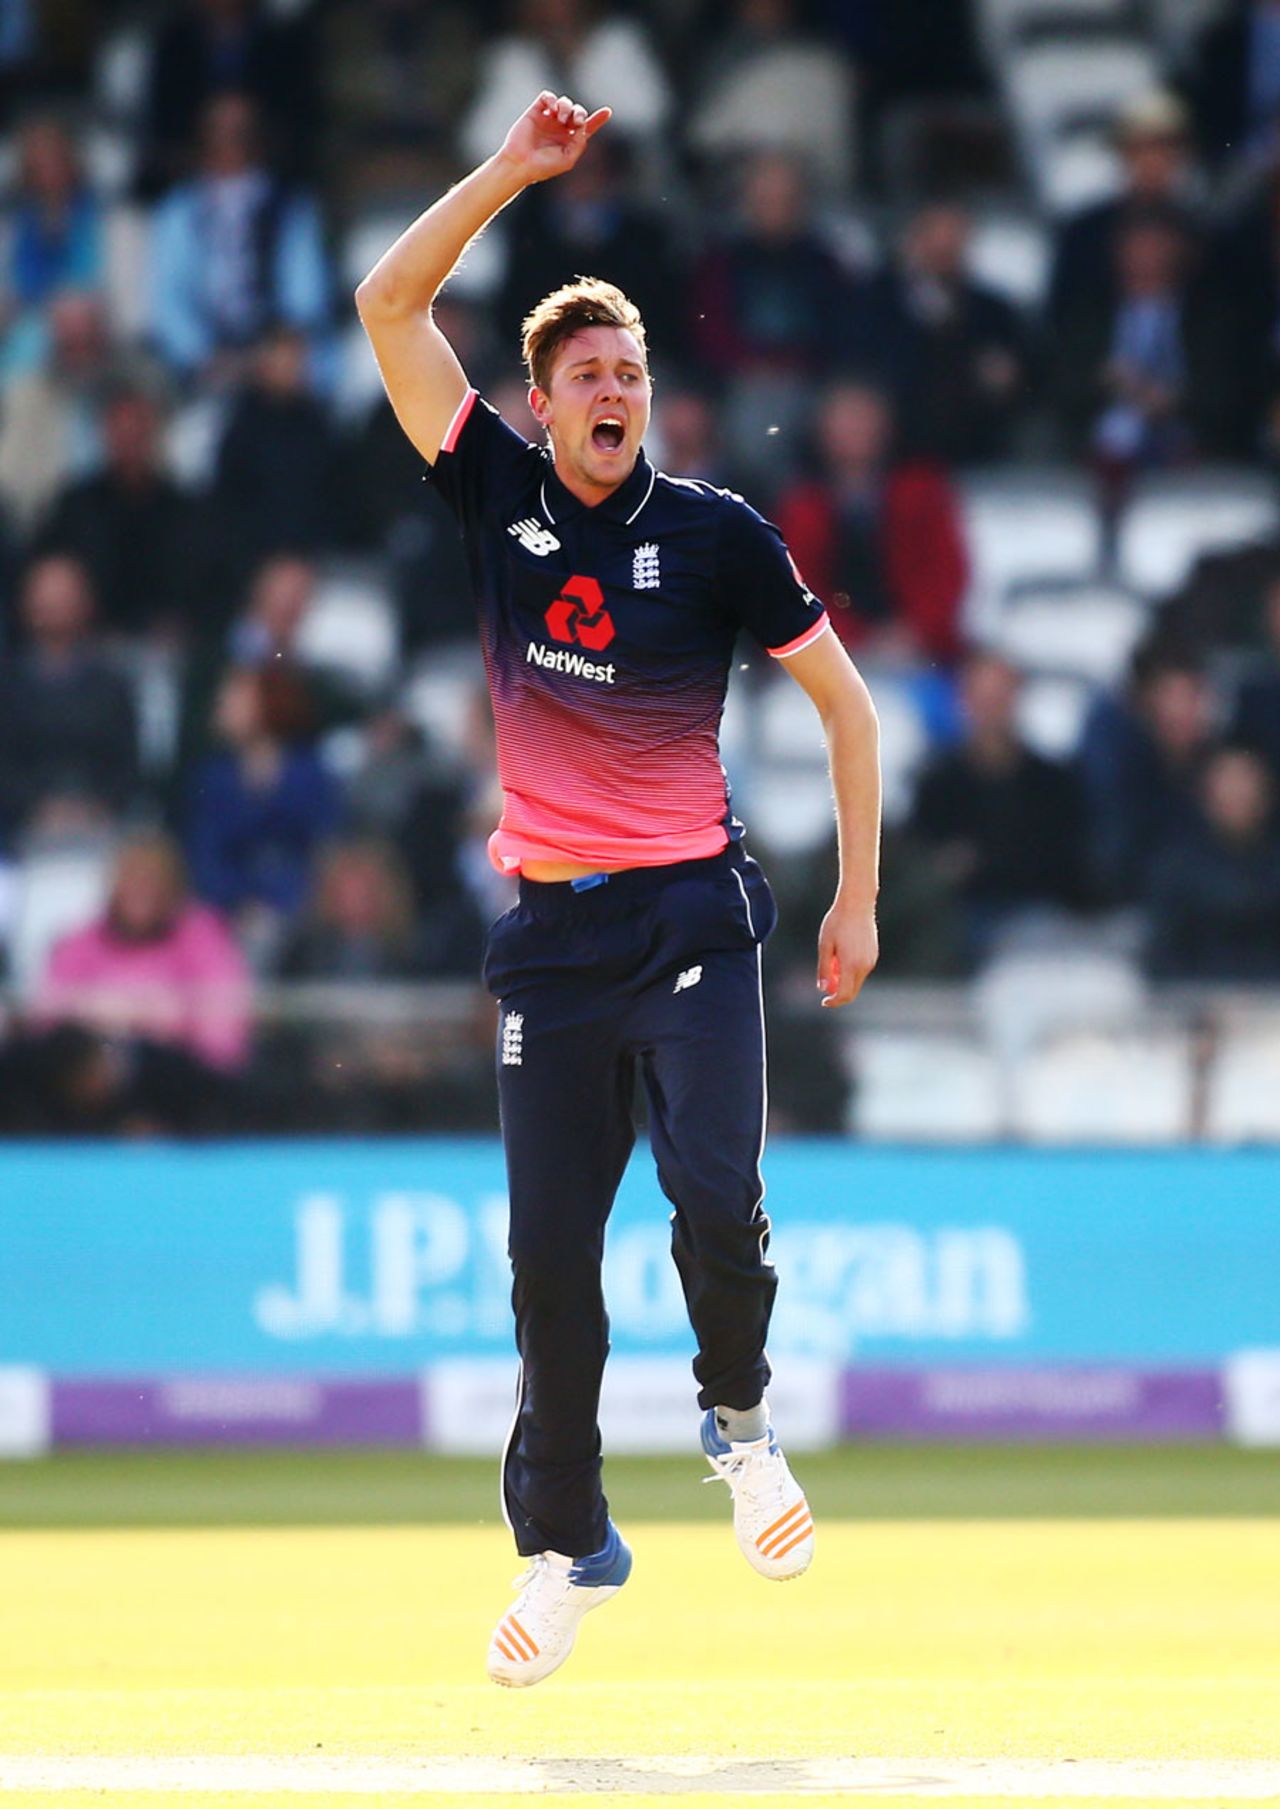 Jake Ball picked up the crucial wicket of Paul Stirling, England v Ireland, 2nd ODI, Lord's, May 7, 2017